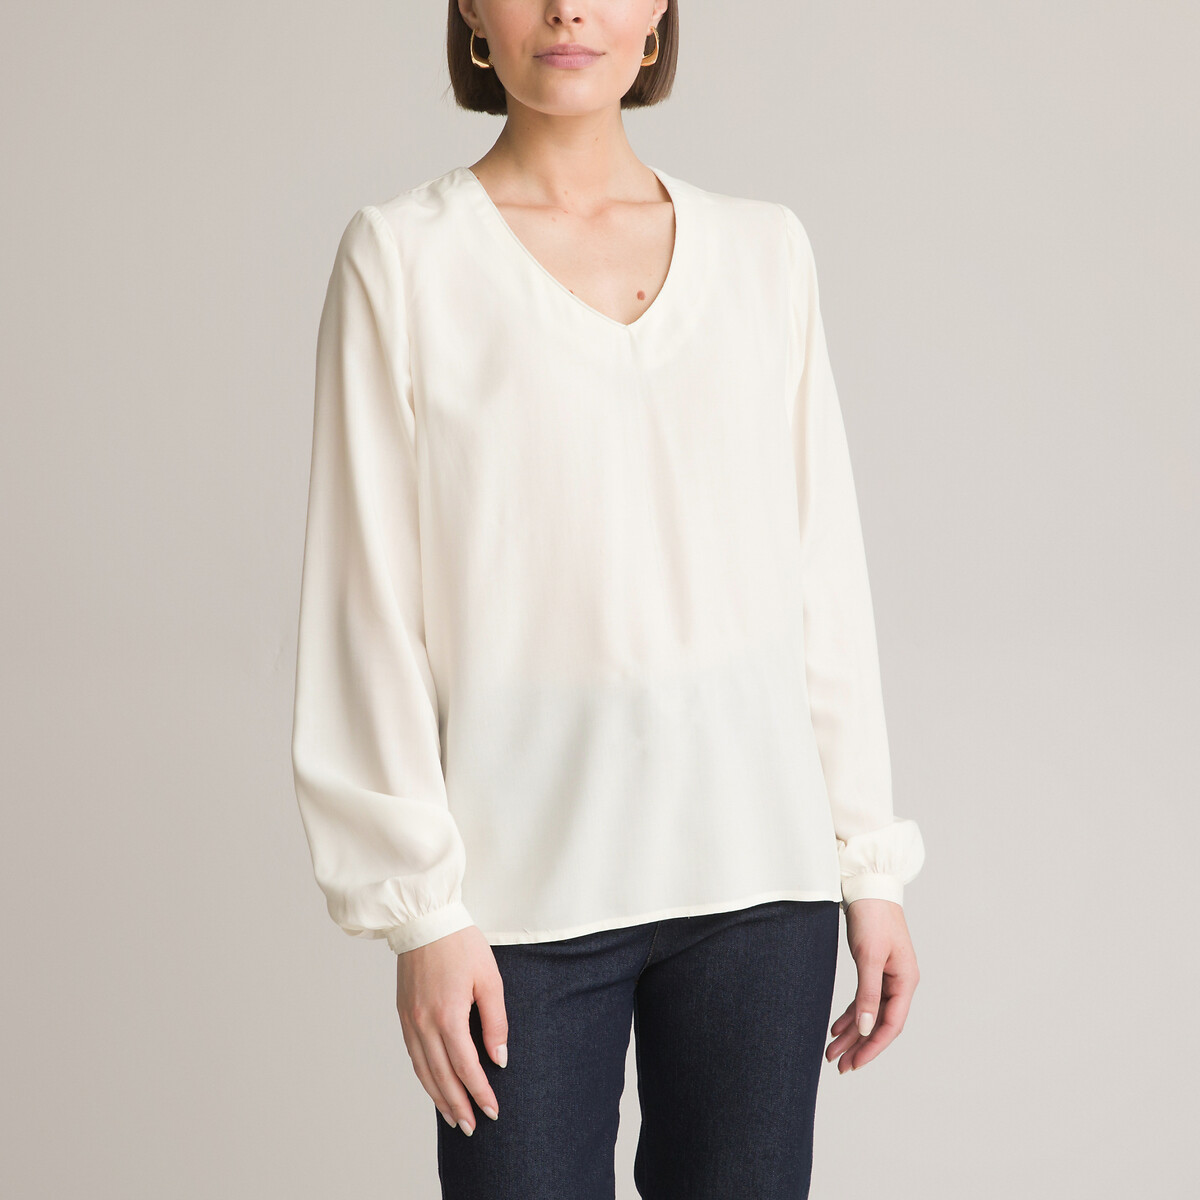 Plain v-neck blouse with long sleeves Anne Weyburn | La Redoute